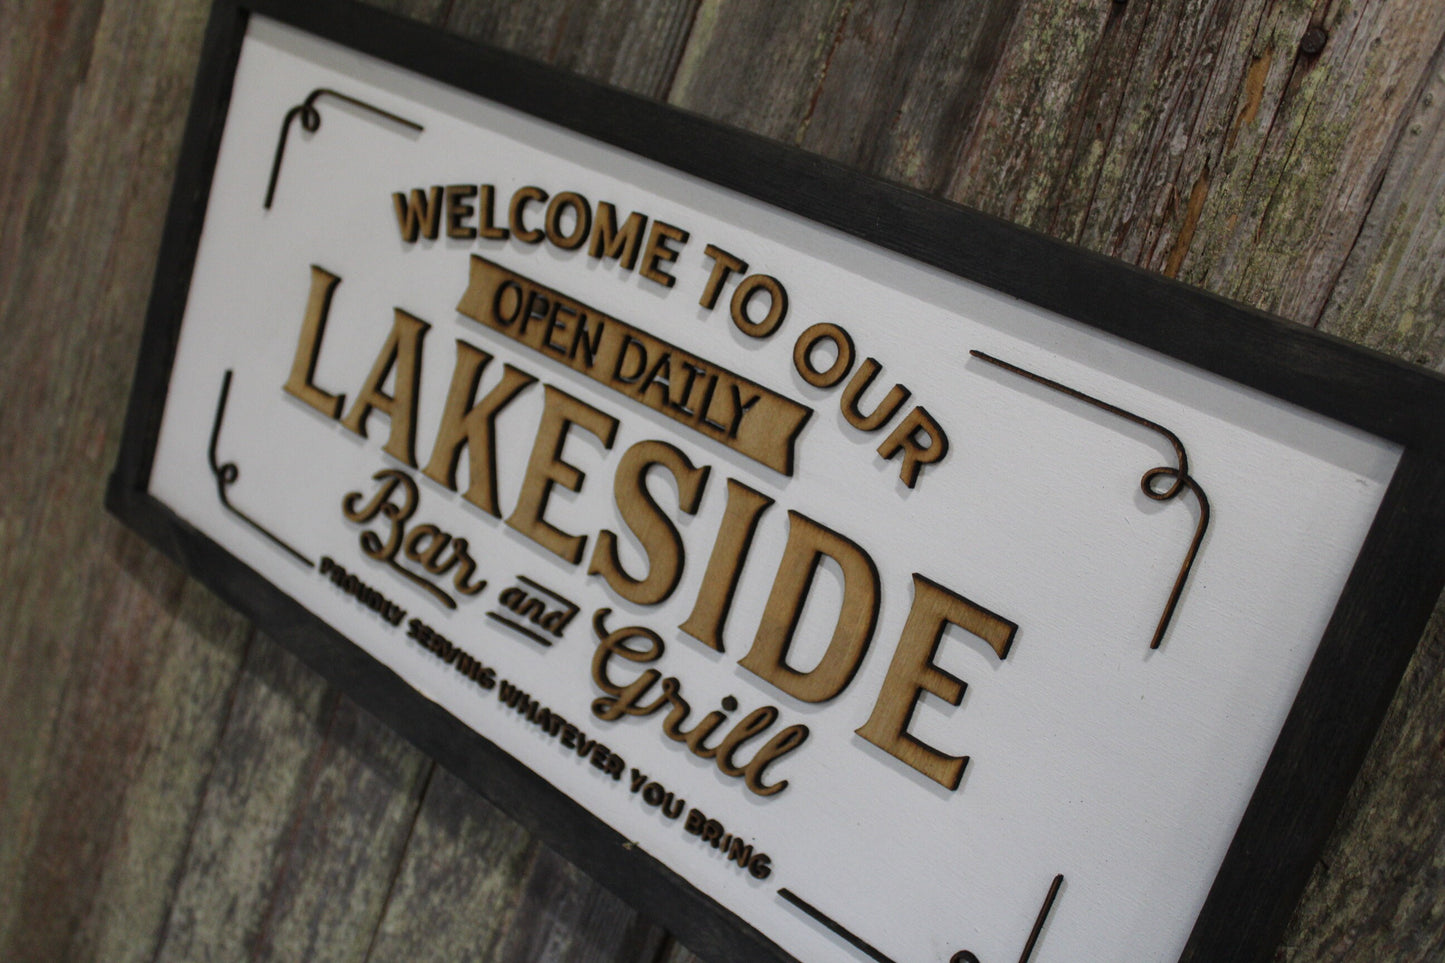 Welcome To Bar and Grill Lake Wood Sign Lakeside 3D Raised Text Serving Whatever You Bring Handmade Rustic Primitive Lake House Beach House